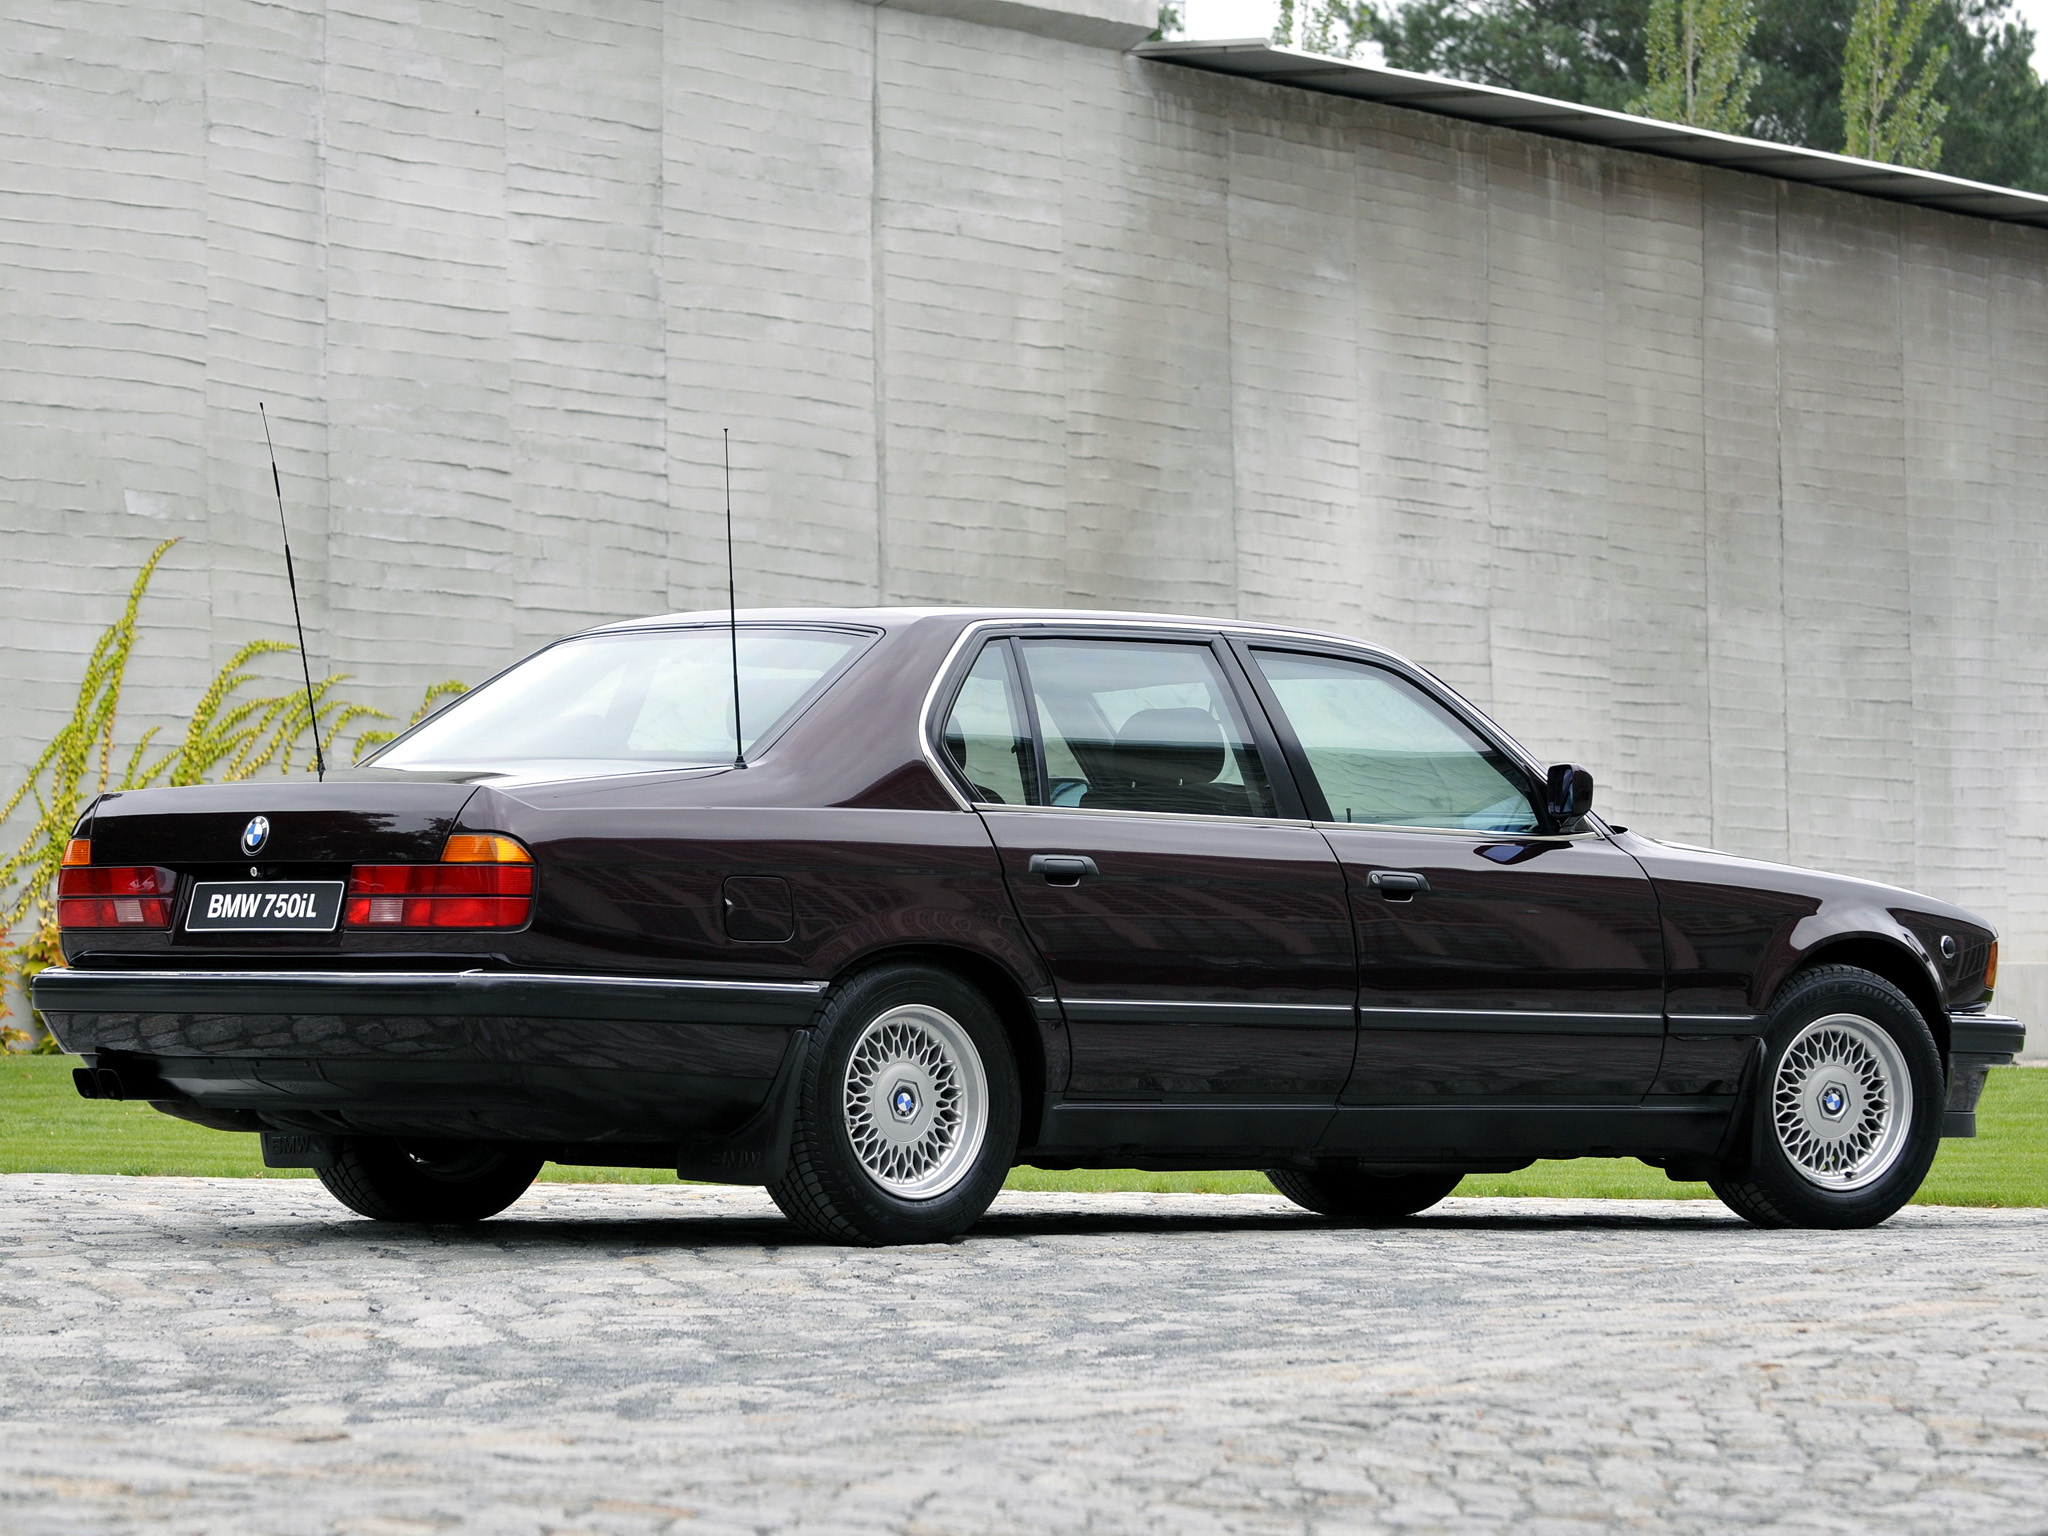 1987, Armored, Bmw, 750il, Security, E32, Luxury Wallpaper